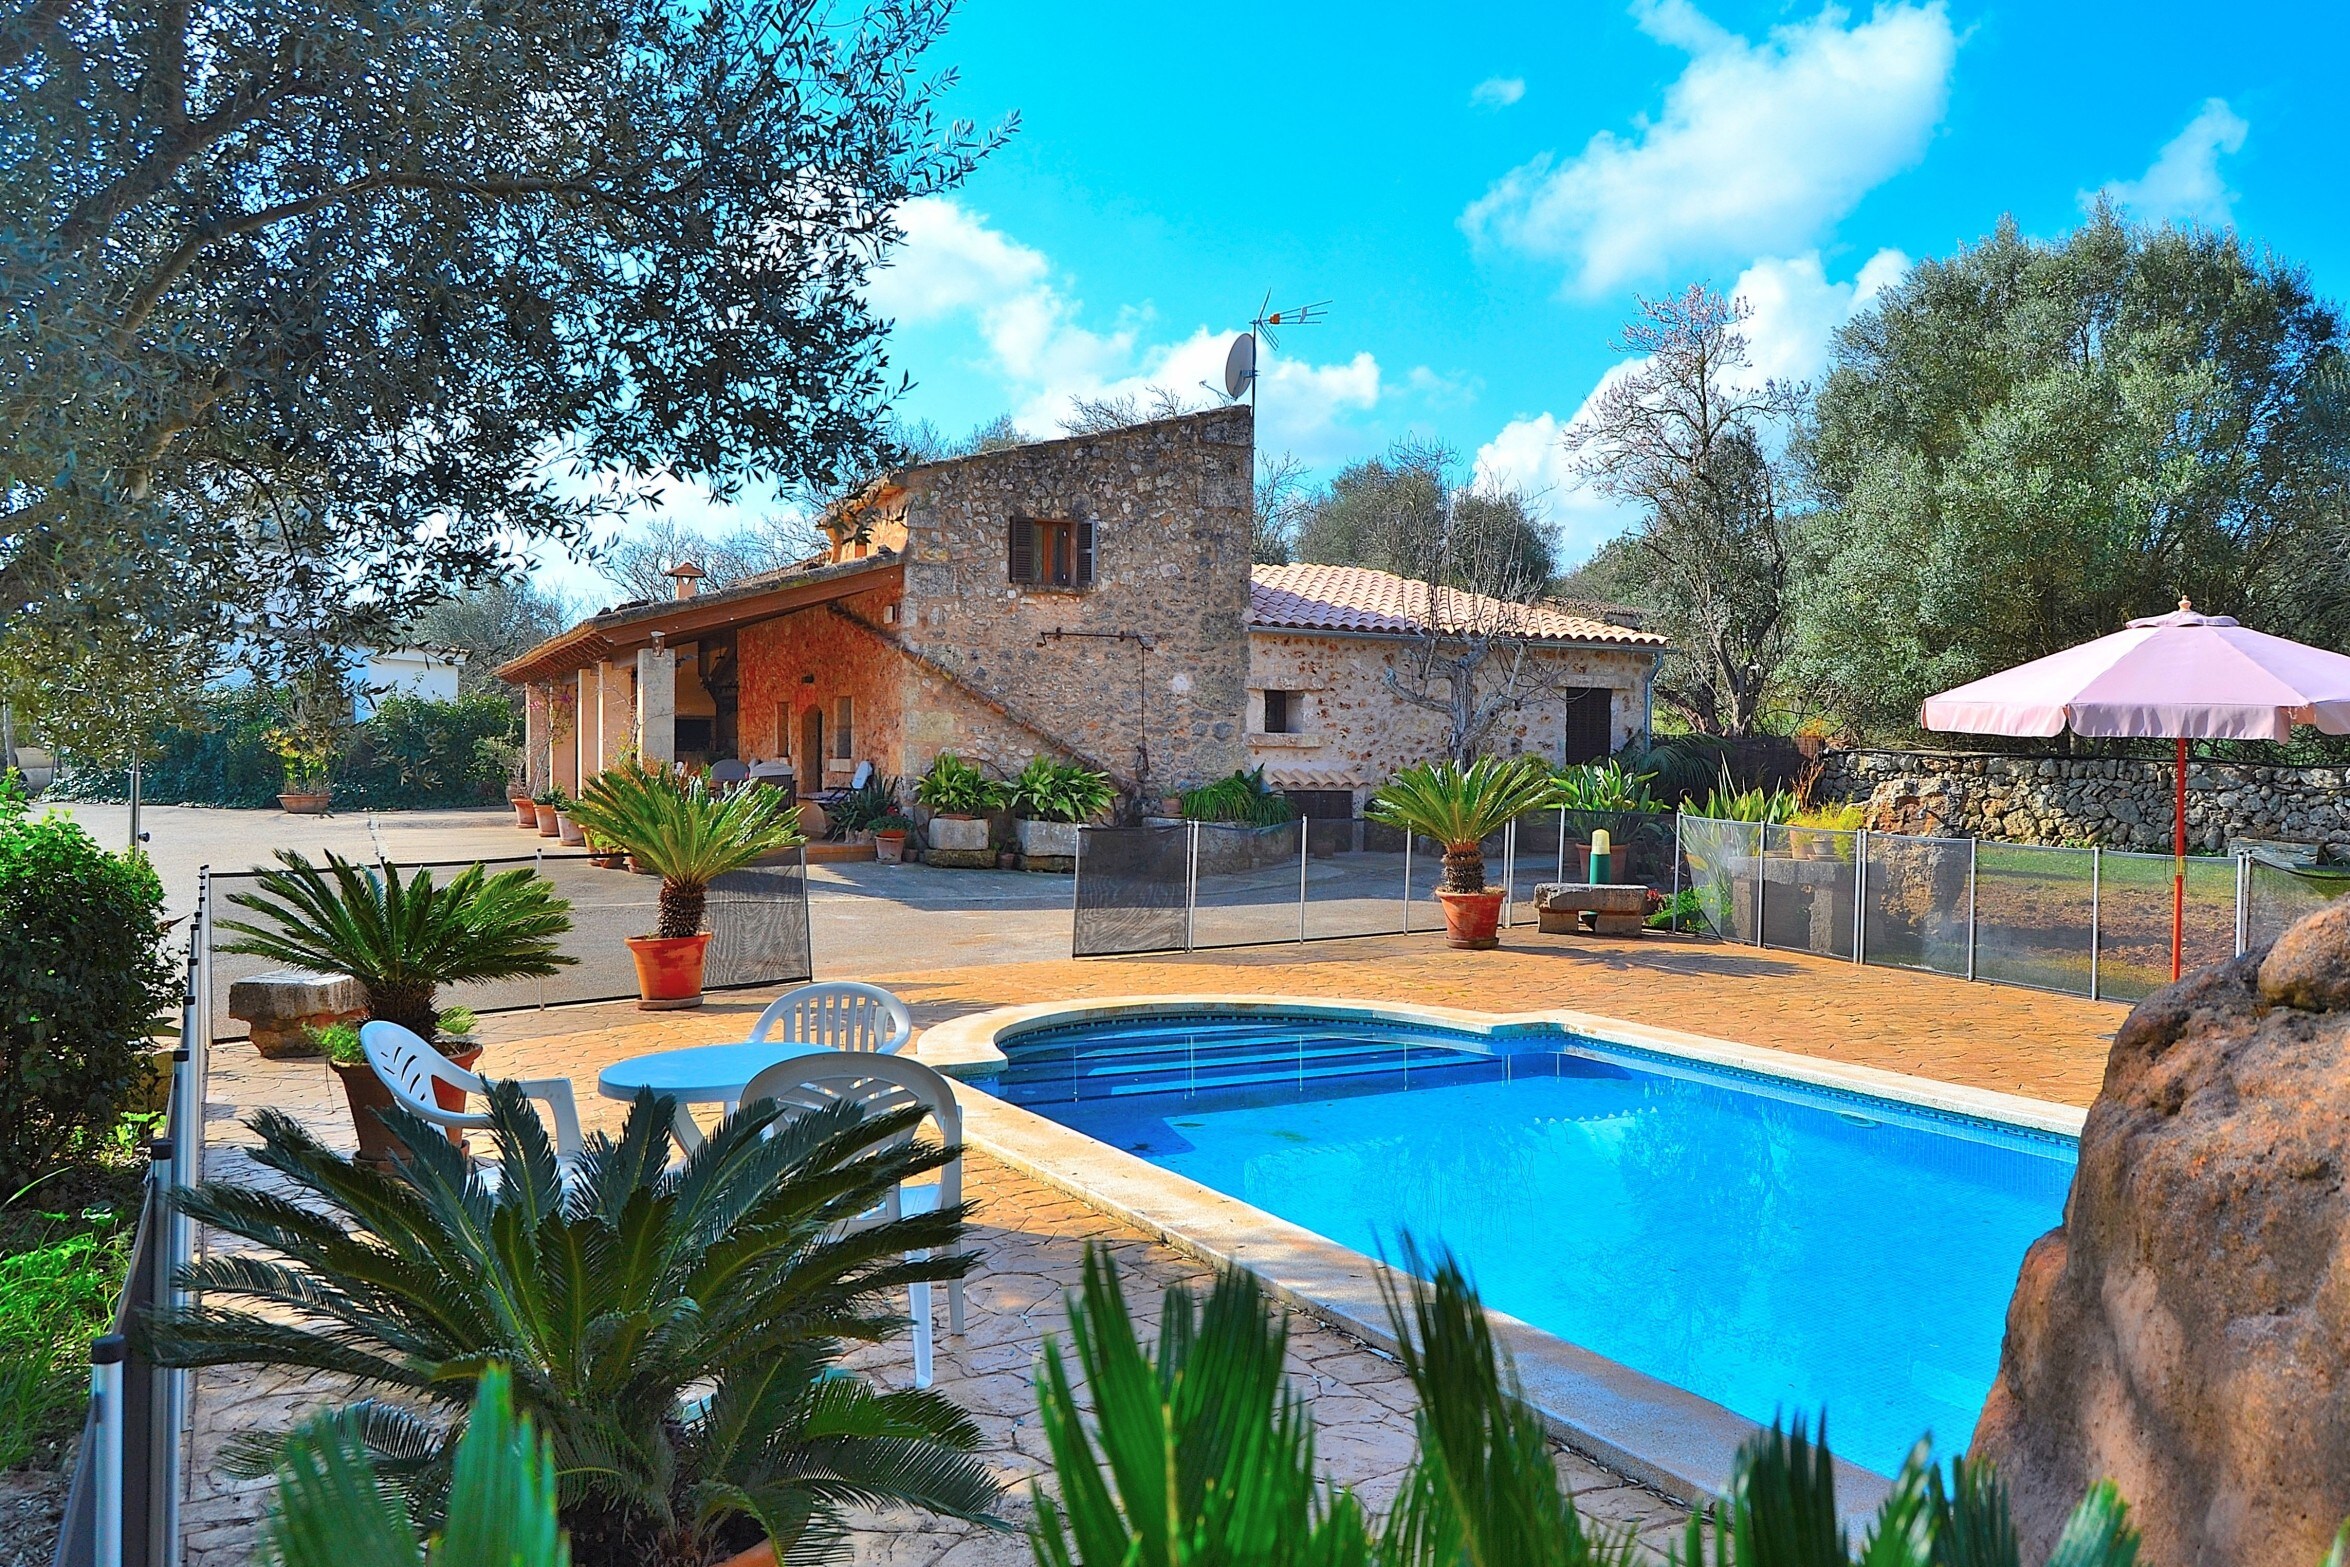 From 100 € per day you can rent your finca in Mallorca from private
LLUIBI